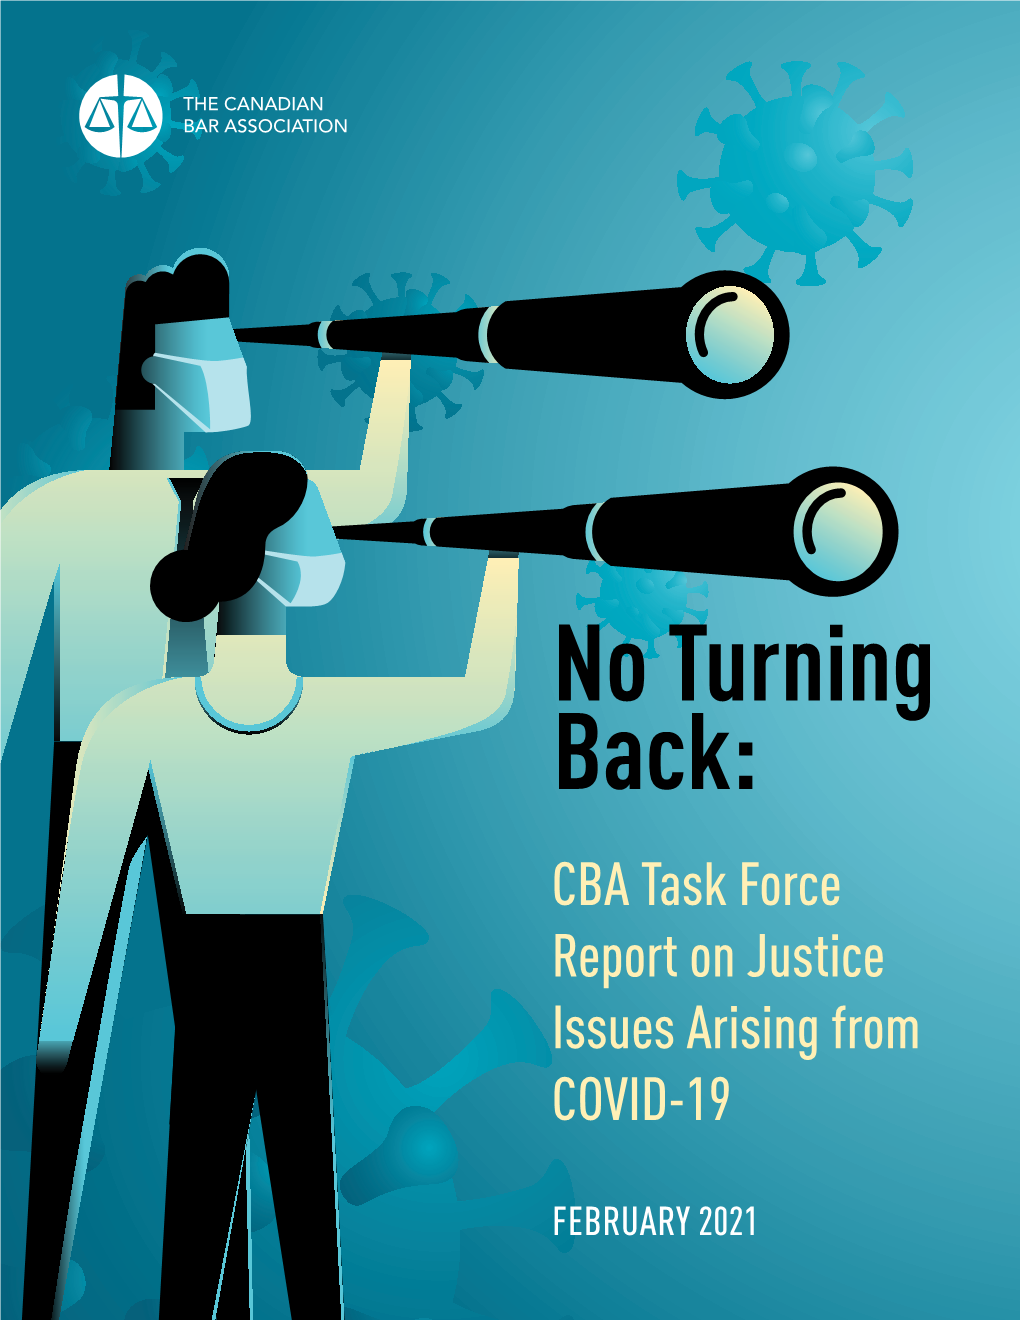 No Turning Back: CBA Task Force Report on Justice Issues Arising from COVID-19